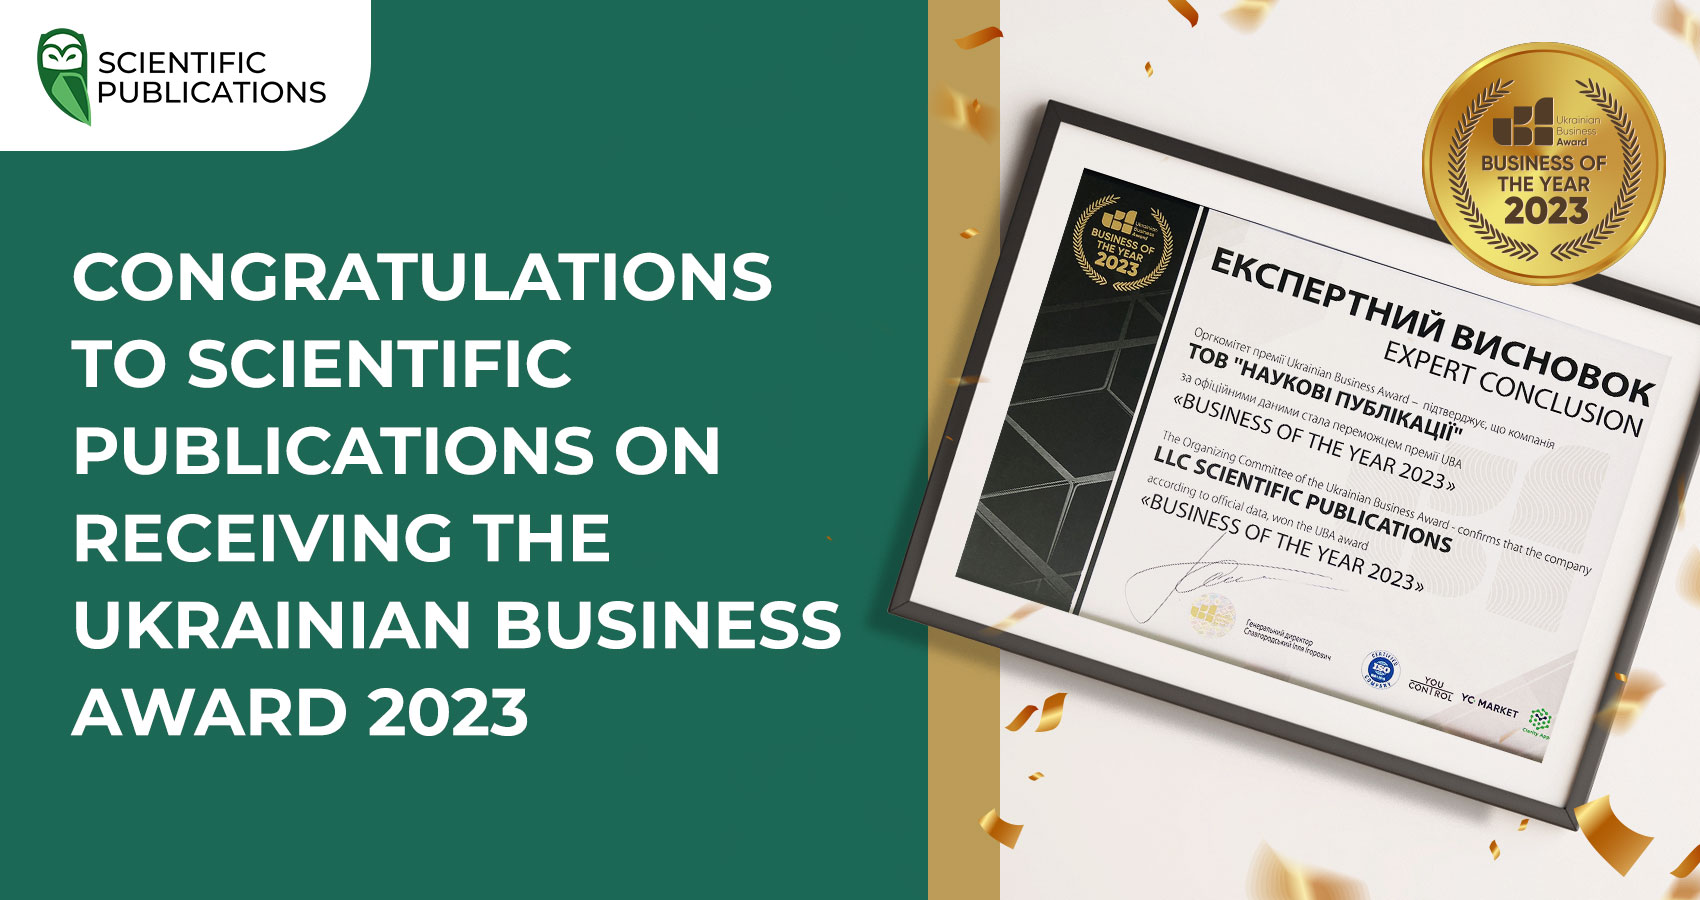 Congratulations to Scientific Publications Ukraine on being honored with the Ukrainian Business Award 2023